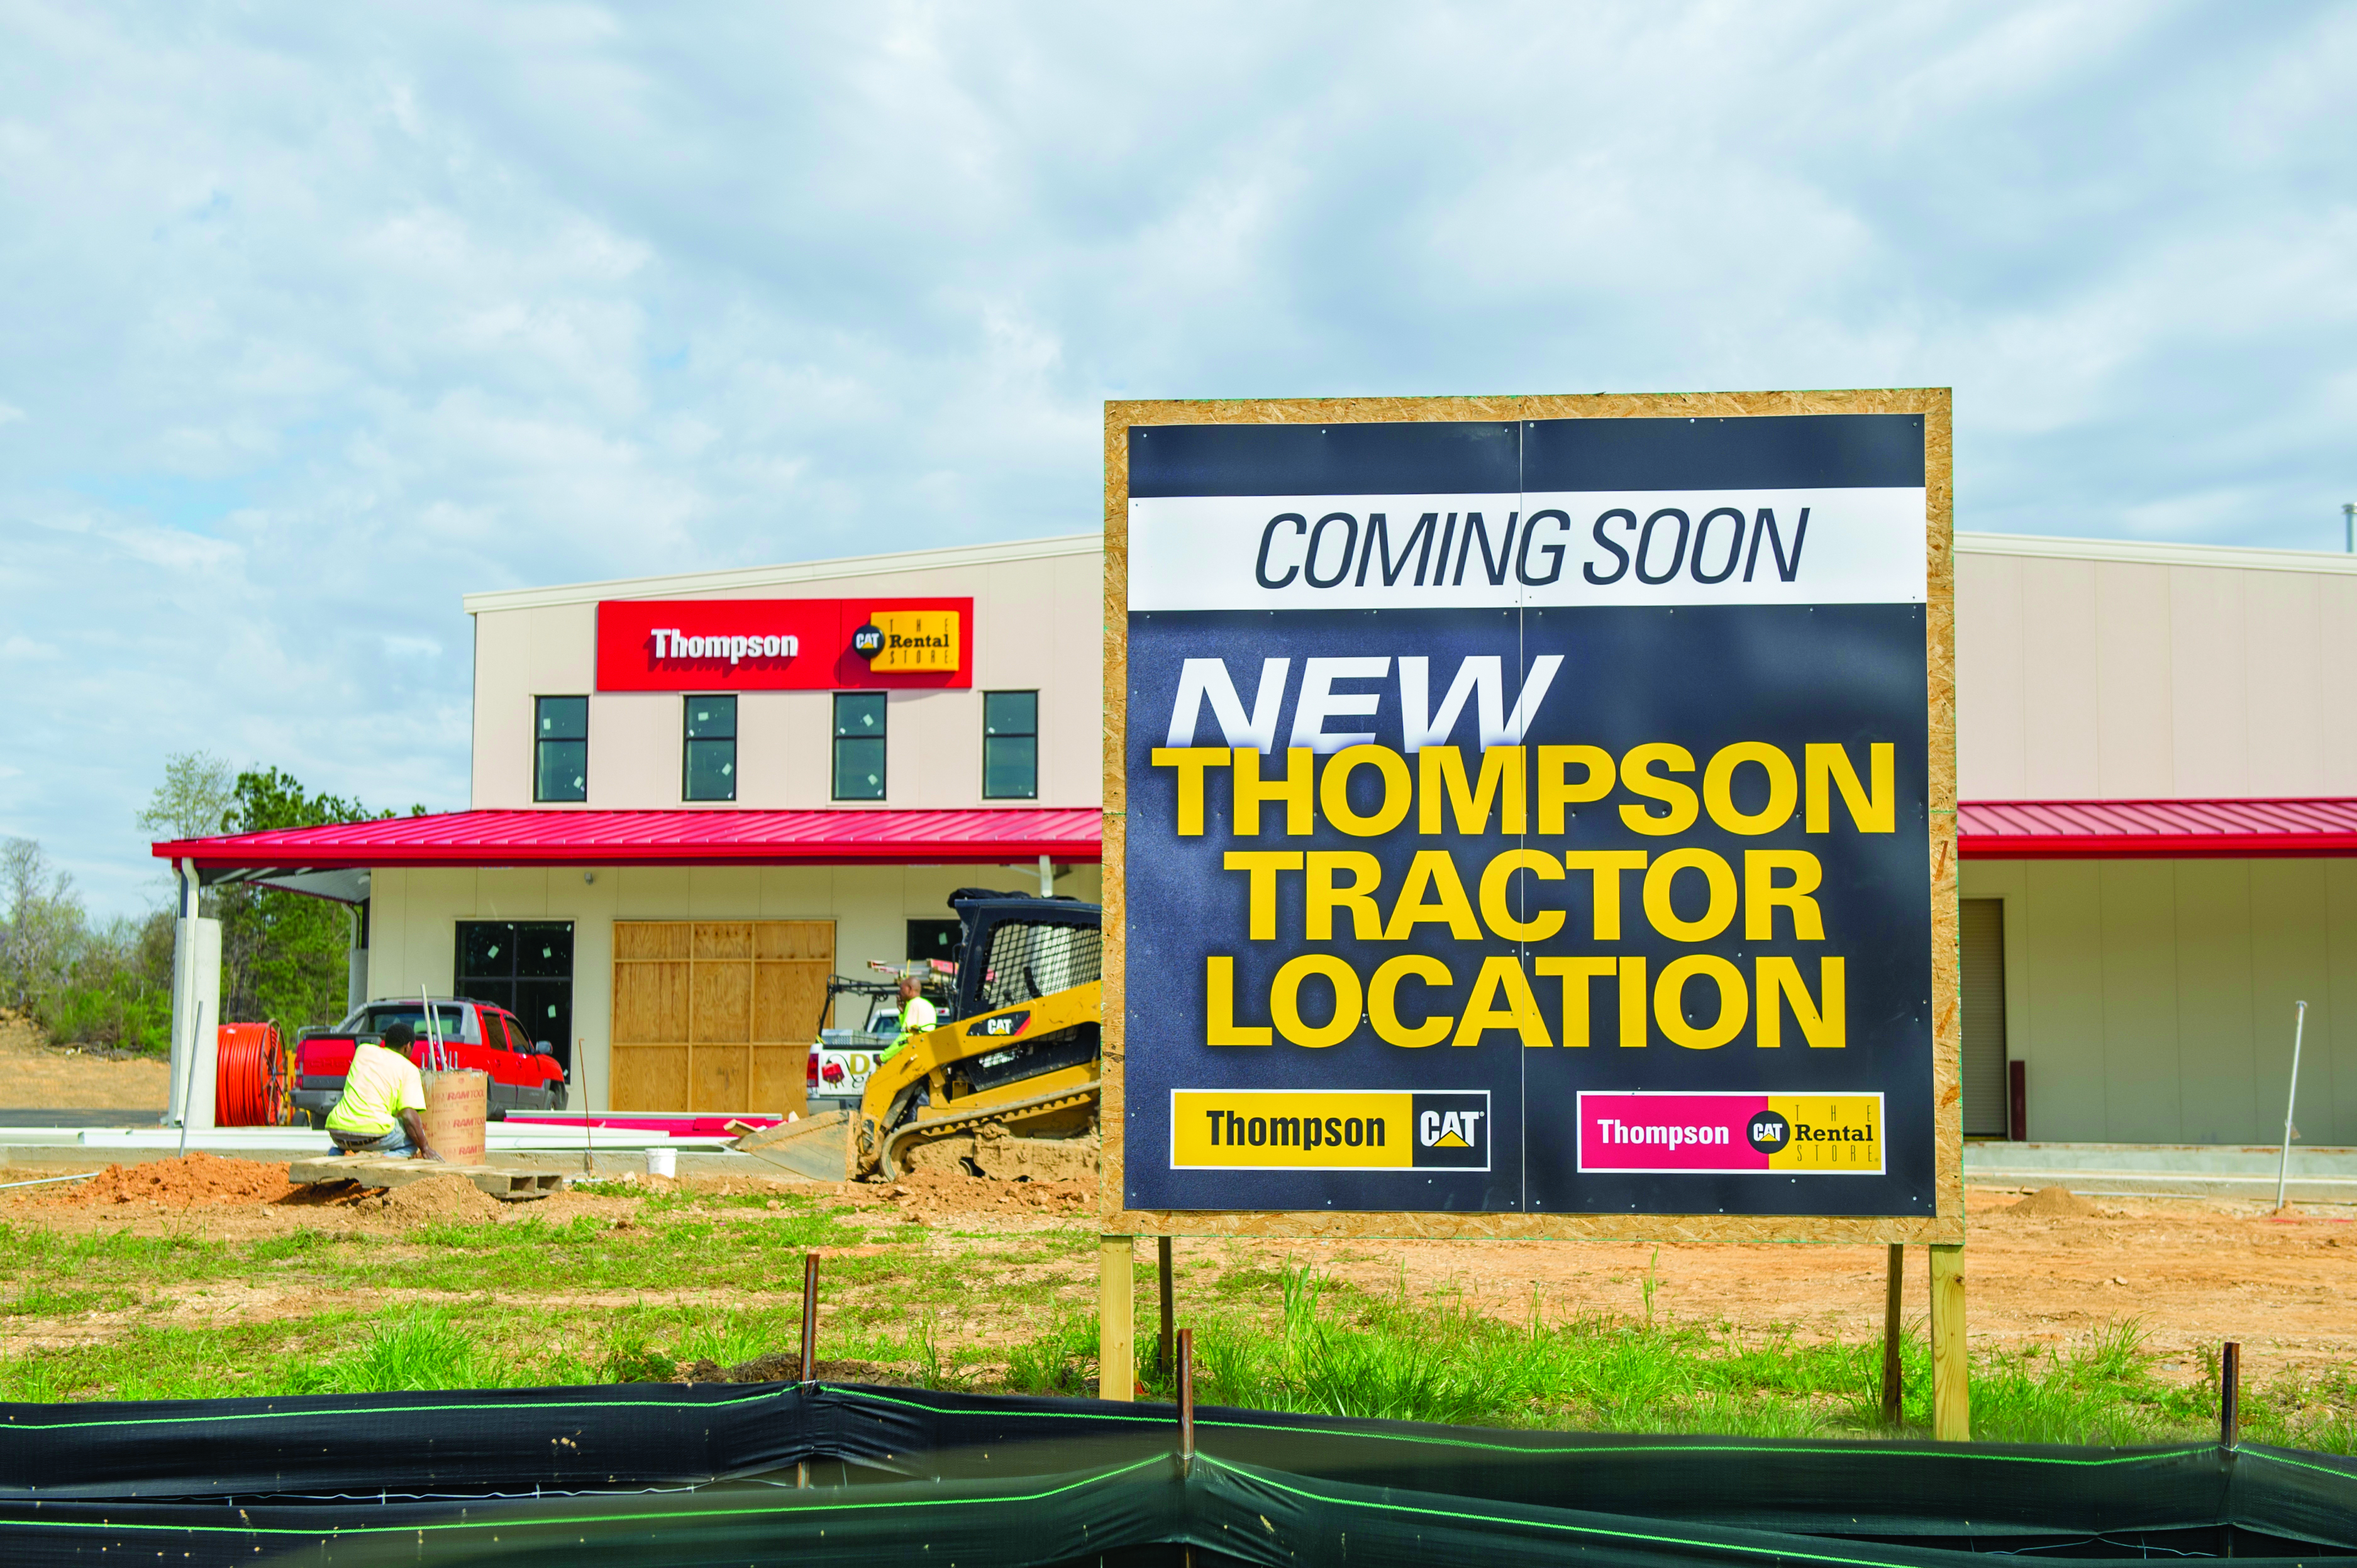 New Thompson Cat Rental Store to hold grand opening May 24